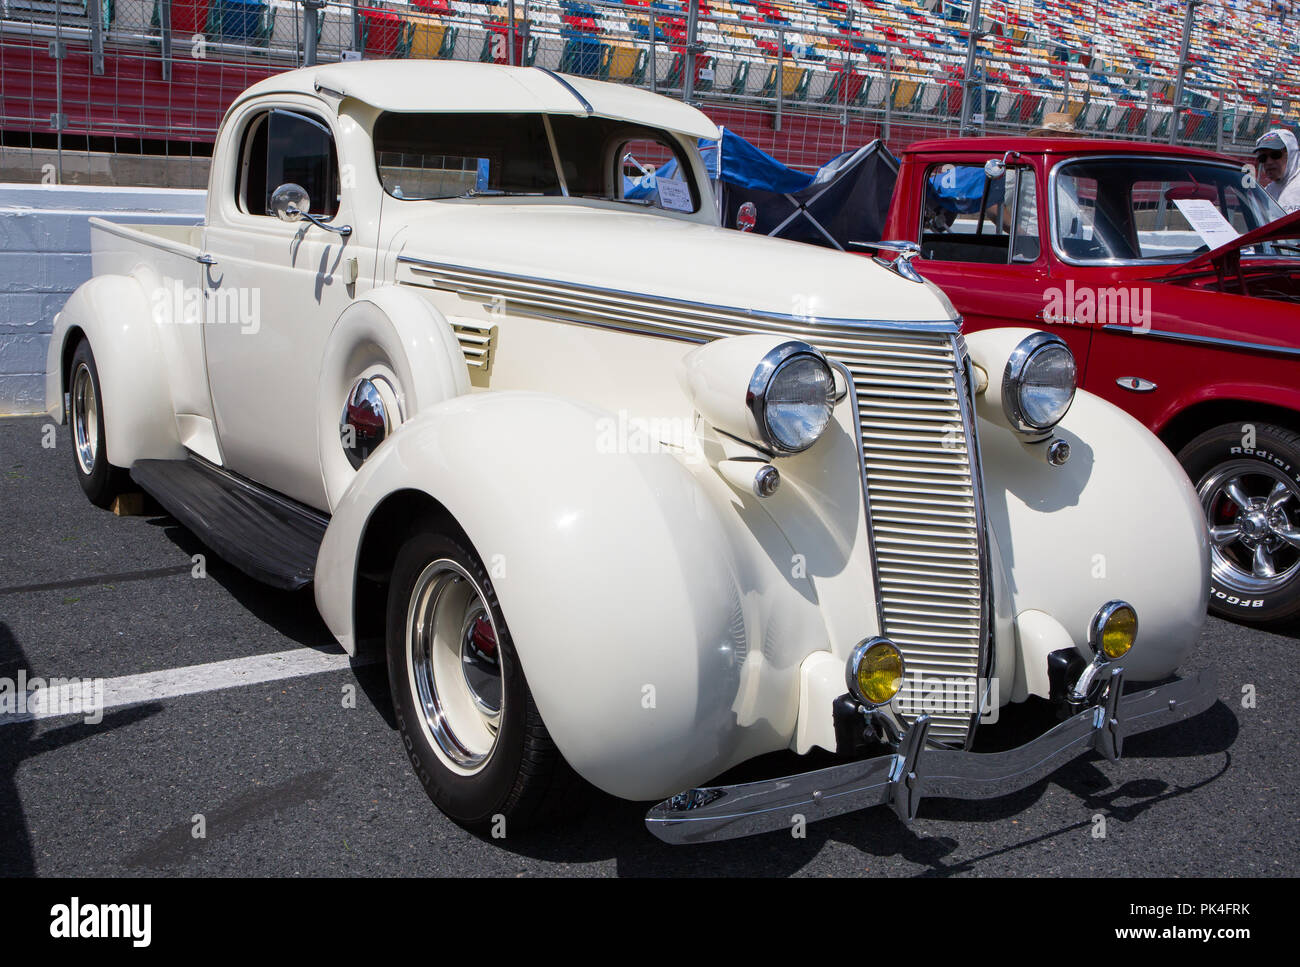 CONCORD, NC (USA) - September 7, 2018: A 1937 Studebaker pickup truck on display at the Pennzoil AutoFair Classic Car Show at Charlotte Motor Speedway Stock Photo